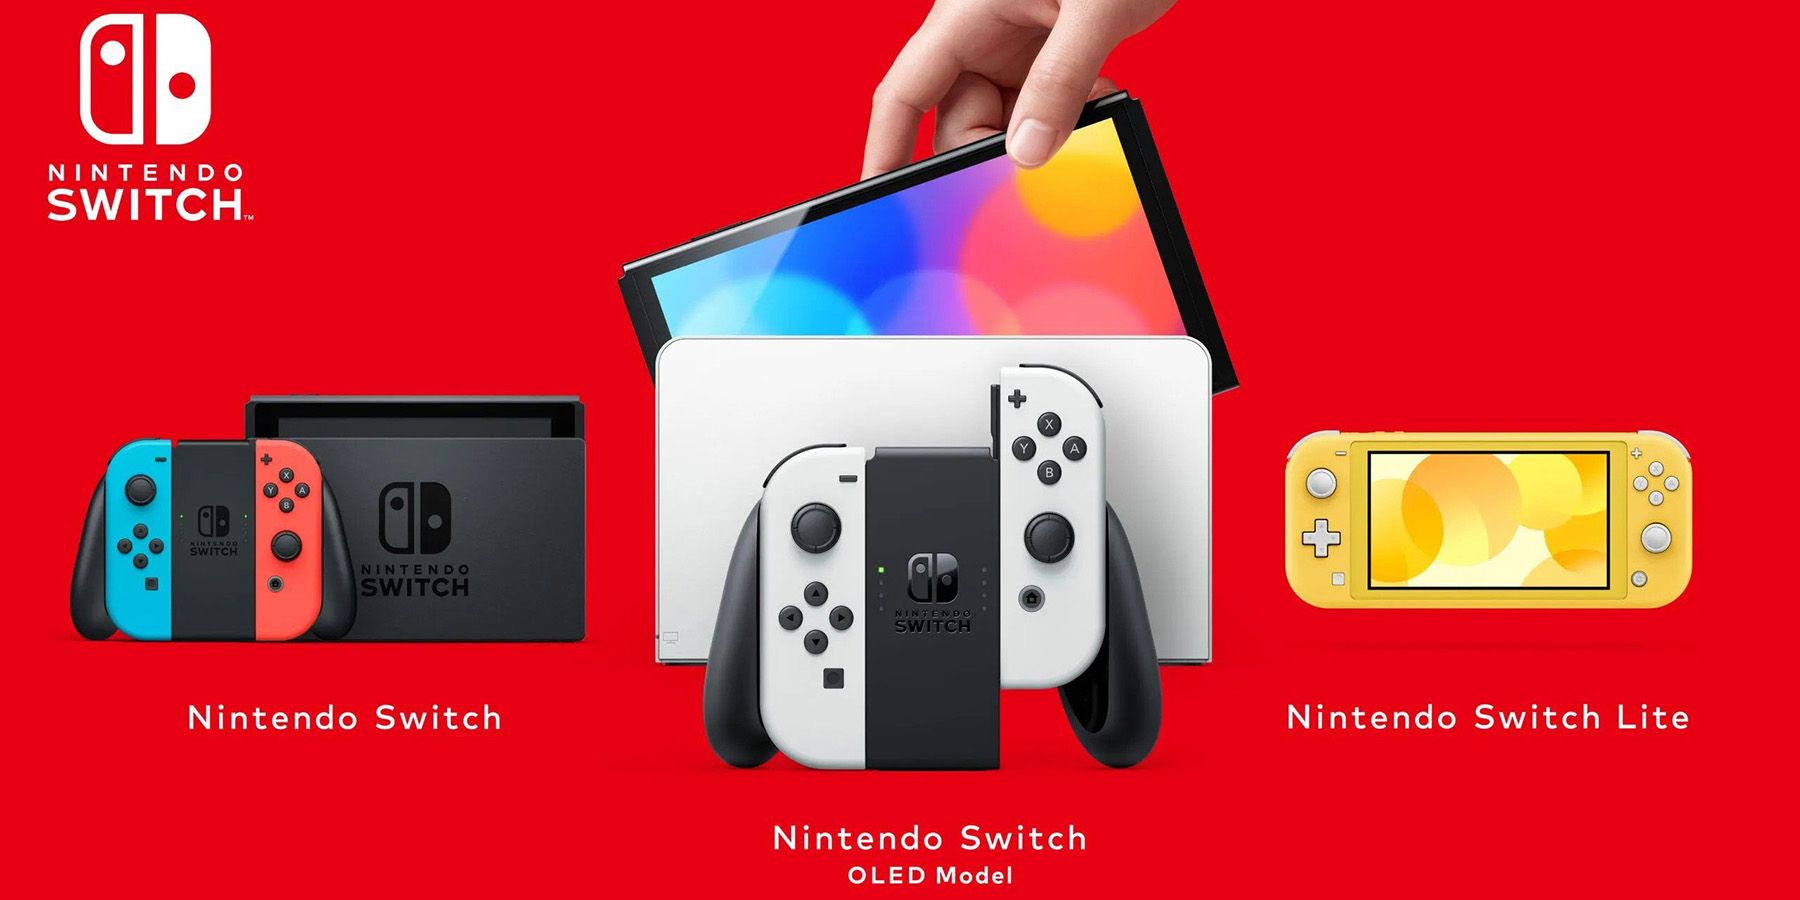 Buying a used Nintendo Switch comes with a lot of risk